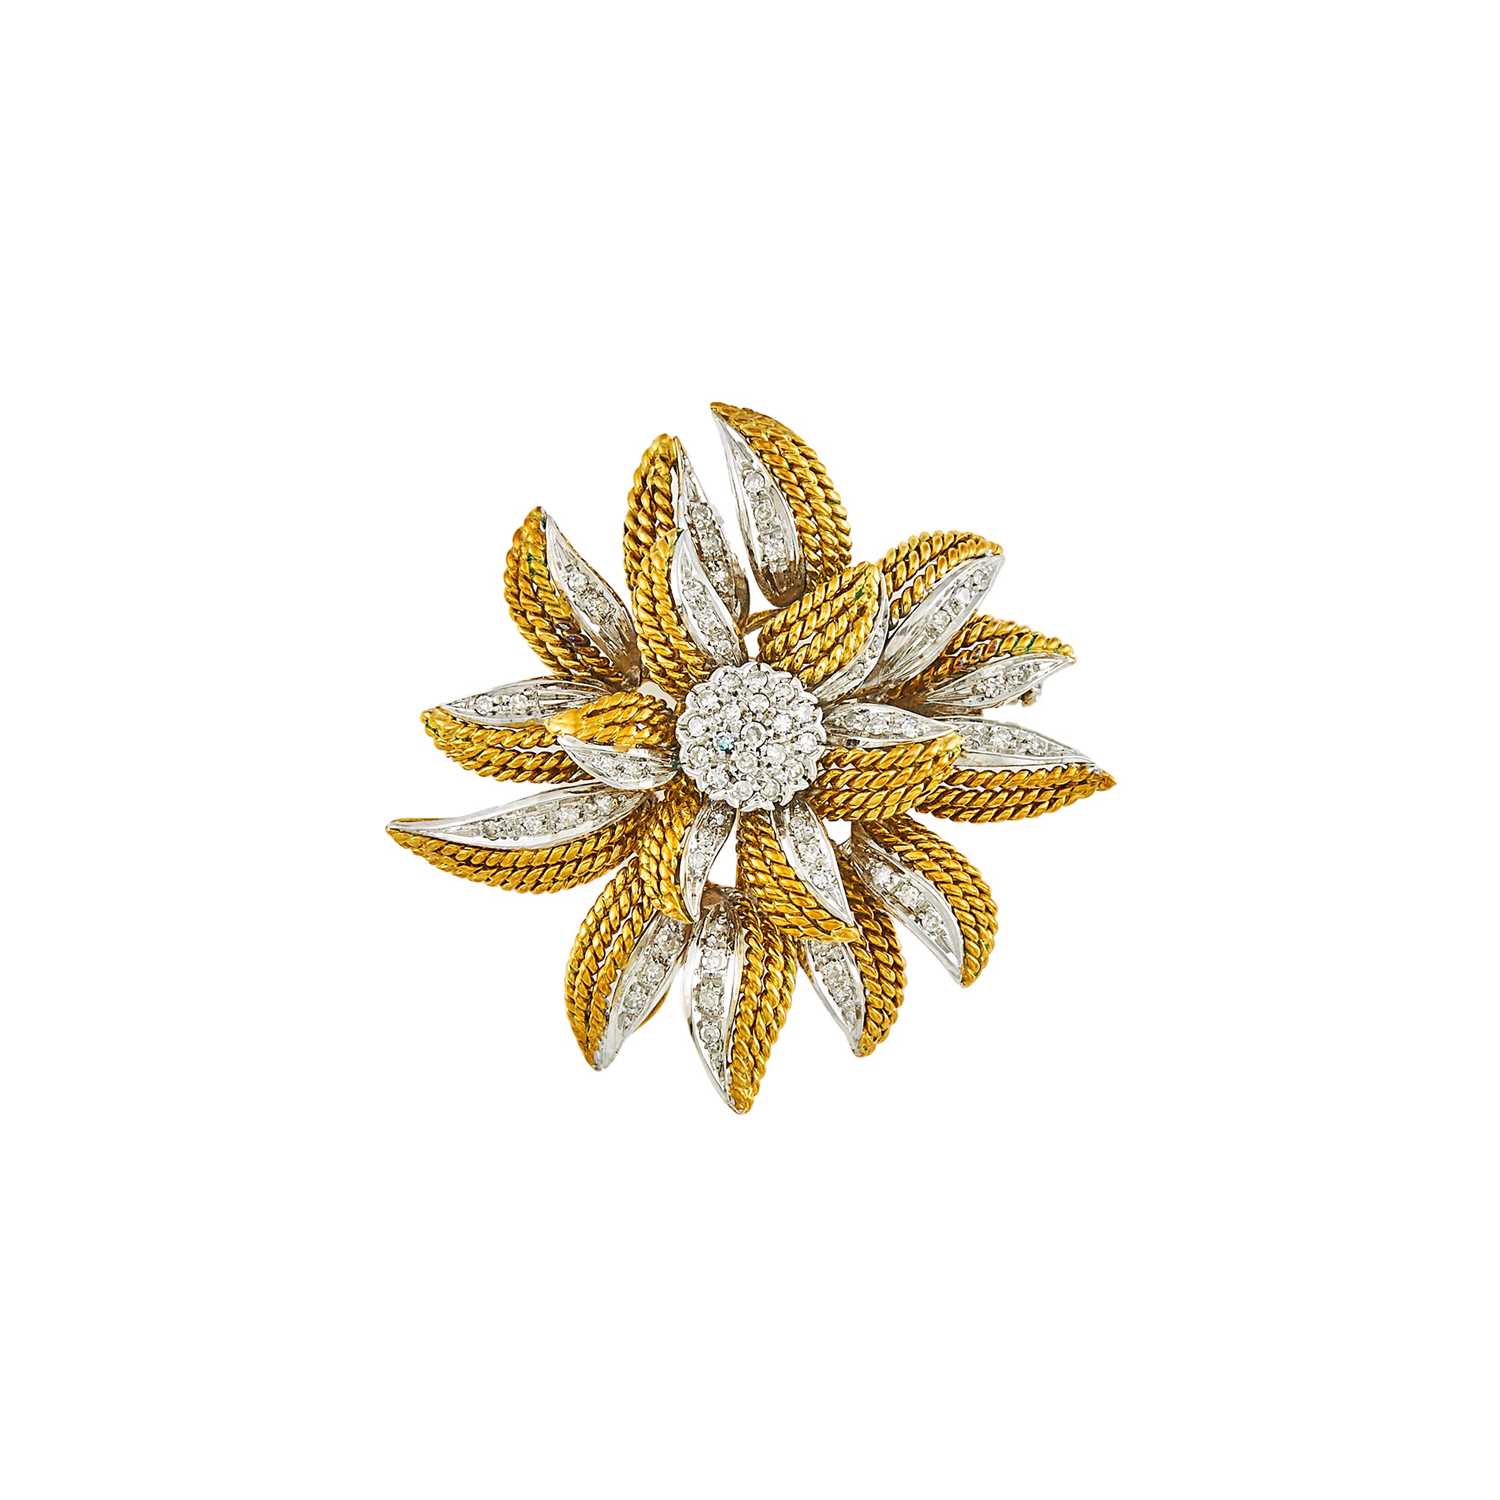 Lot 2109 - Two-Color Gold and Diamond Brooch